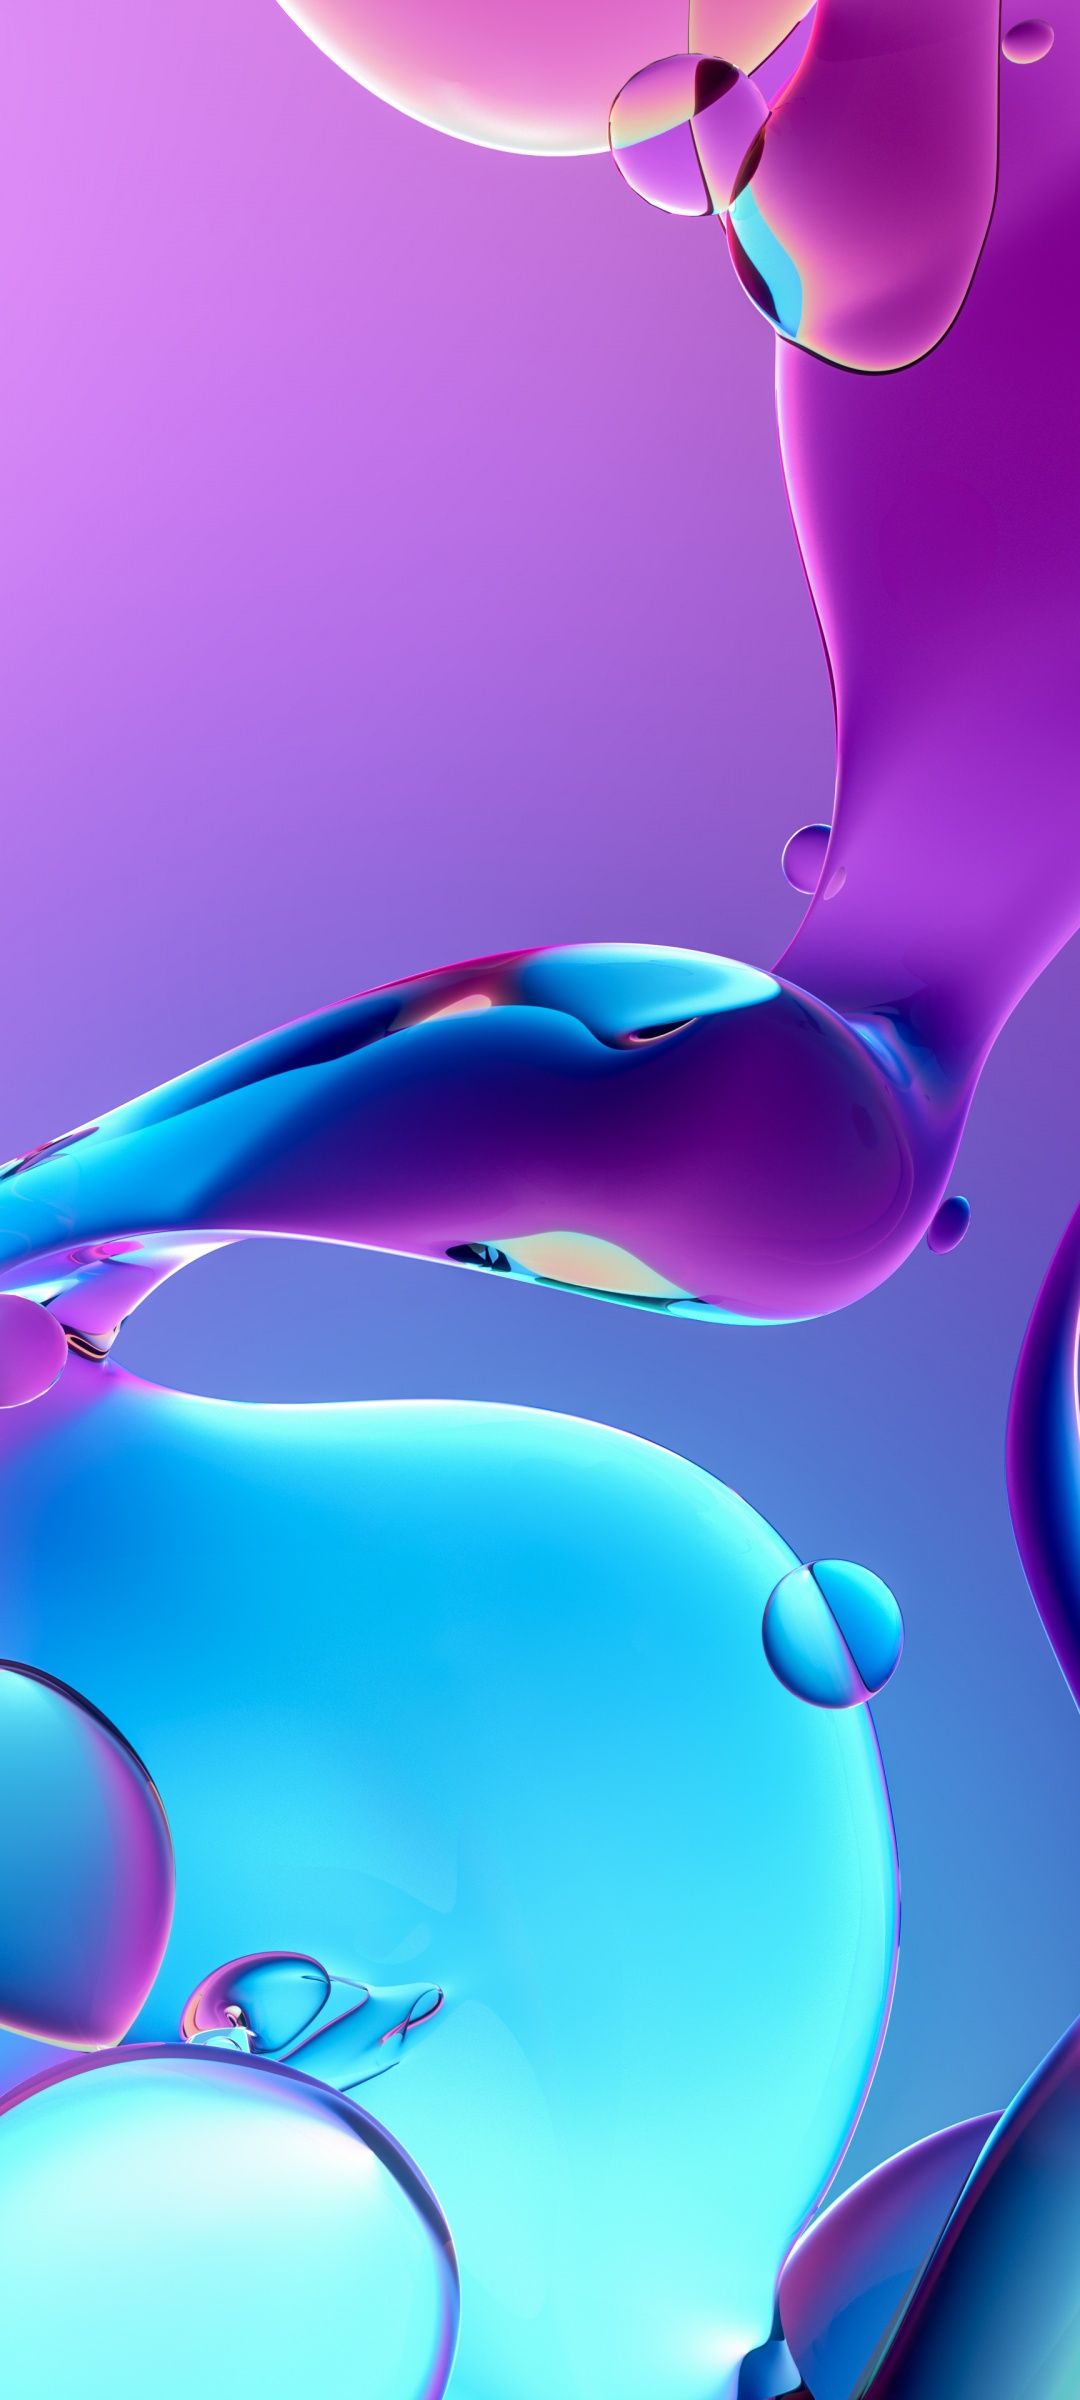 1080x1920 wallpaper of the week: abstract blue and purple - 1080x2400